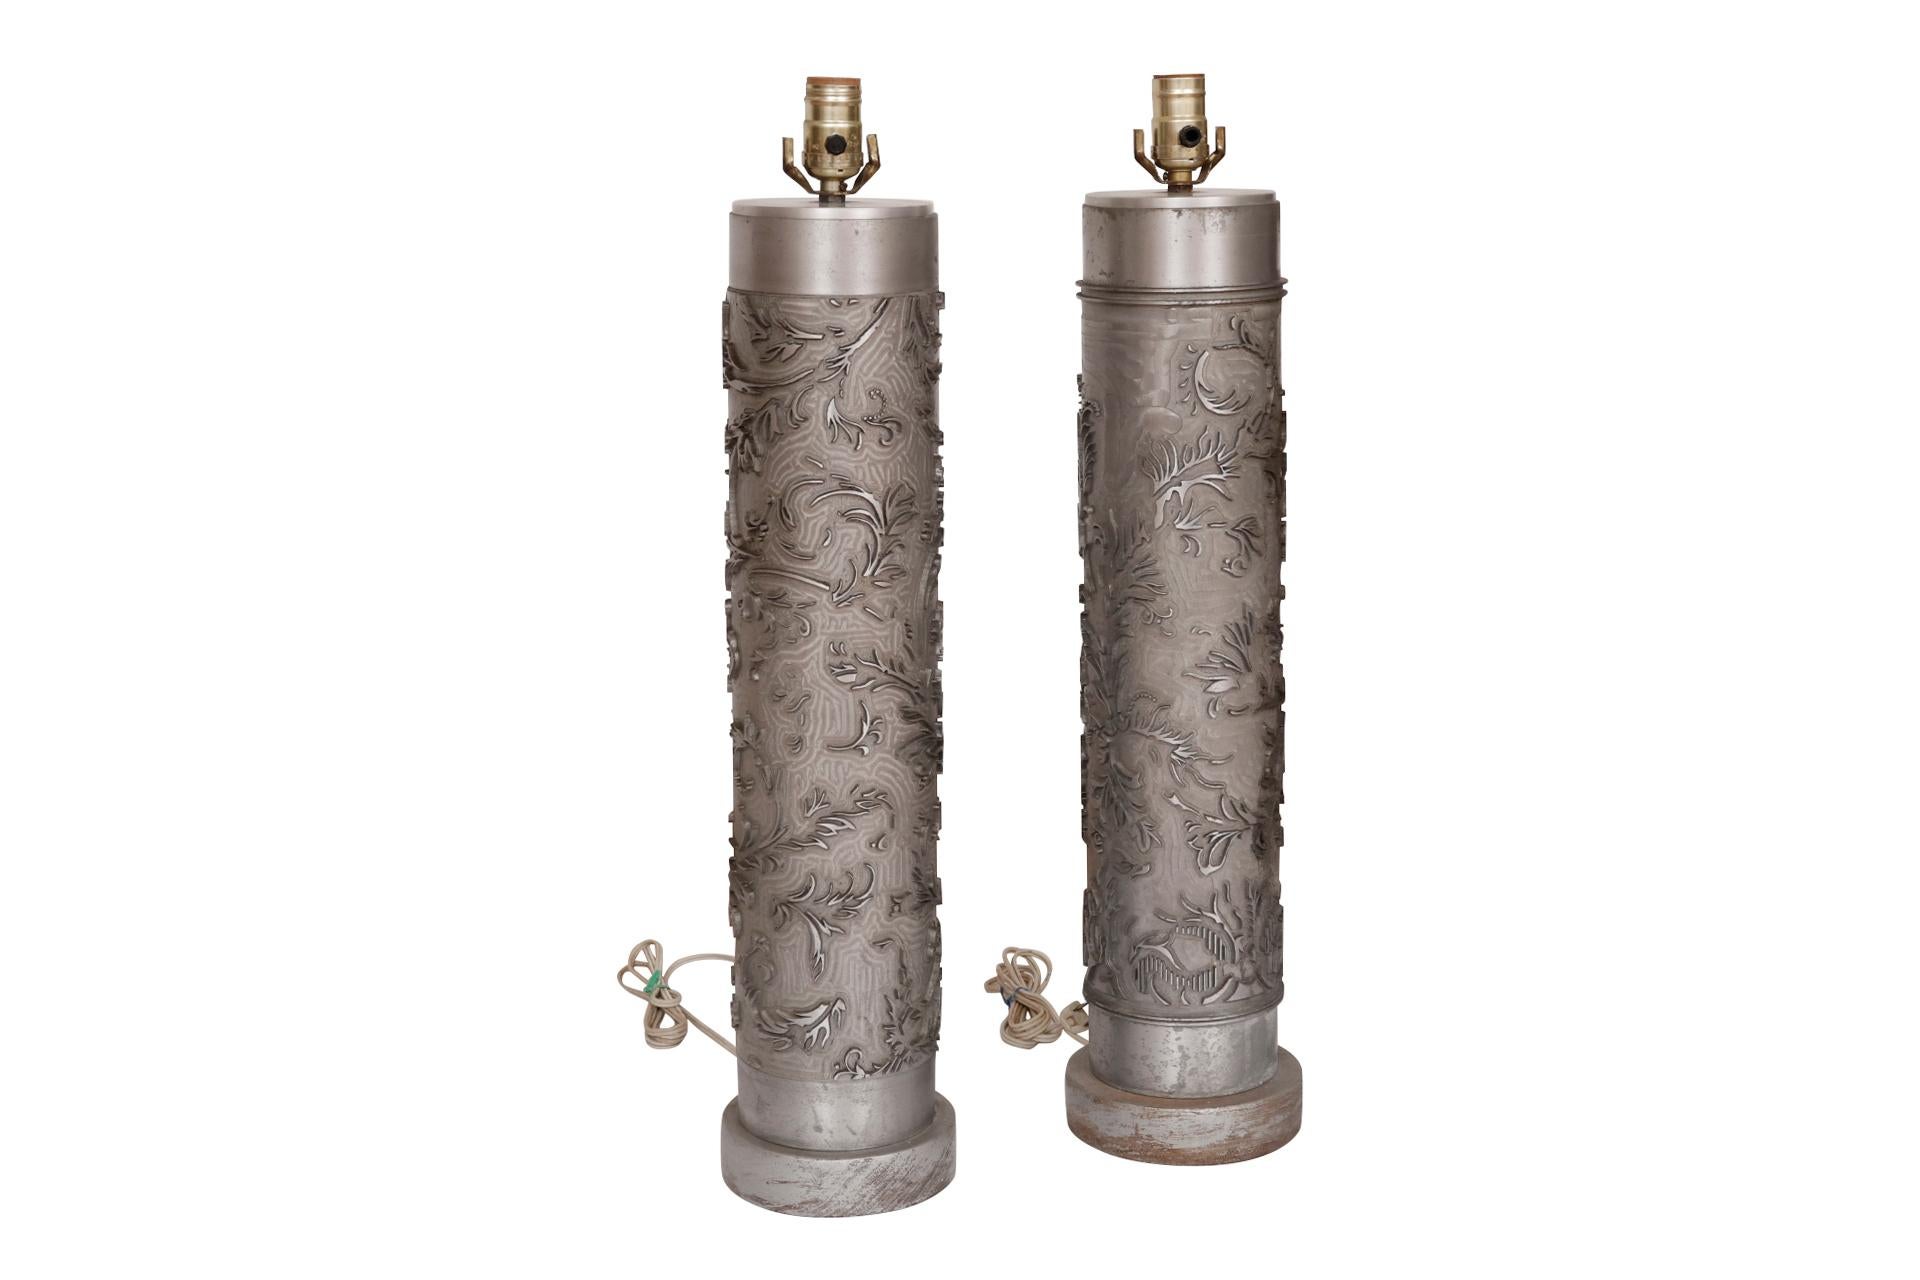 A tall pair of custom lamps made from steel wallpaper printing rollers. Decorated with a raised vine like pattern detailed with dots and lines. Each roller has a round wooden base. Dimensions per lamp.